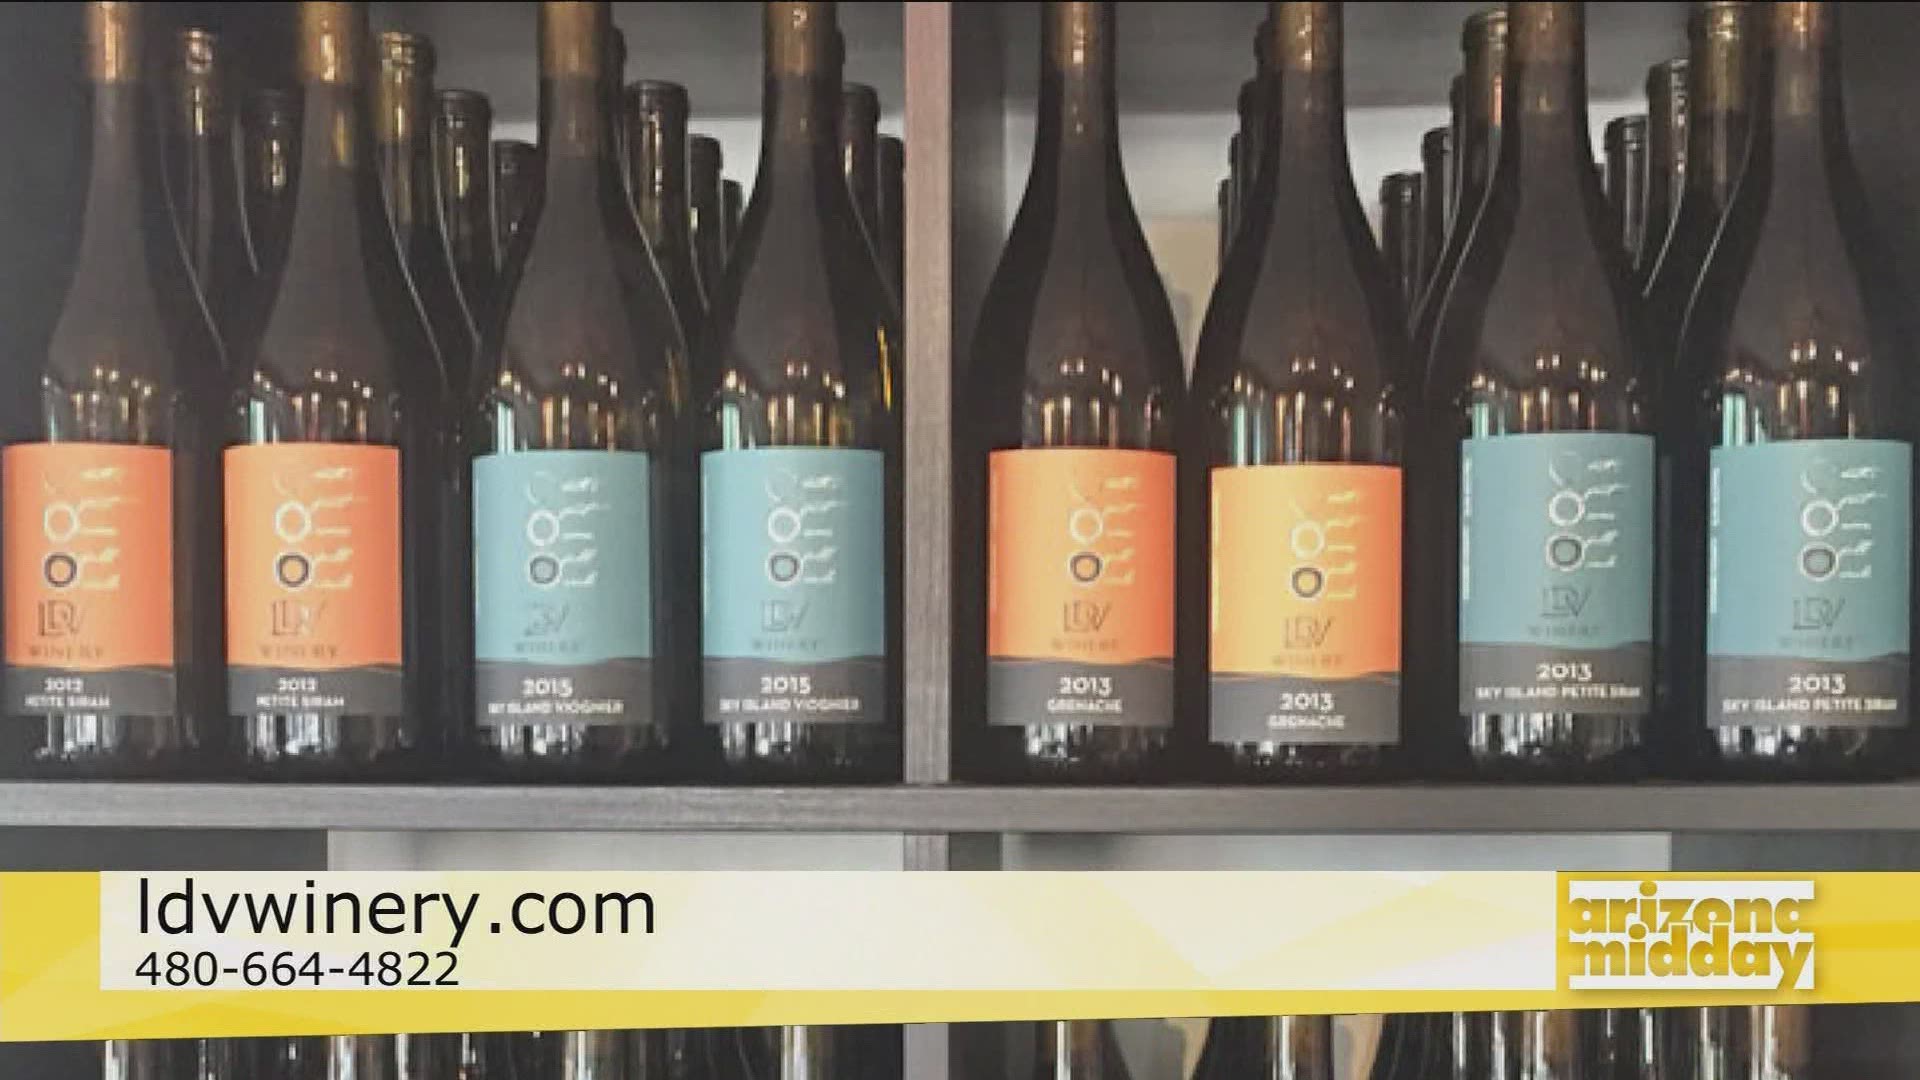 LDV Winery's tasting room is back open and Peggy Fiandaca gives us the scoop on what wines to try with the meal you're eating.